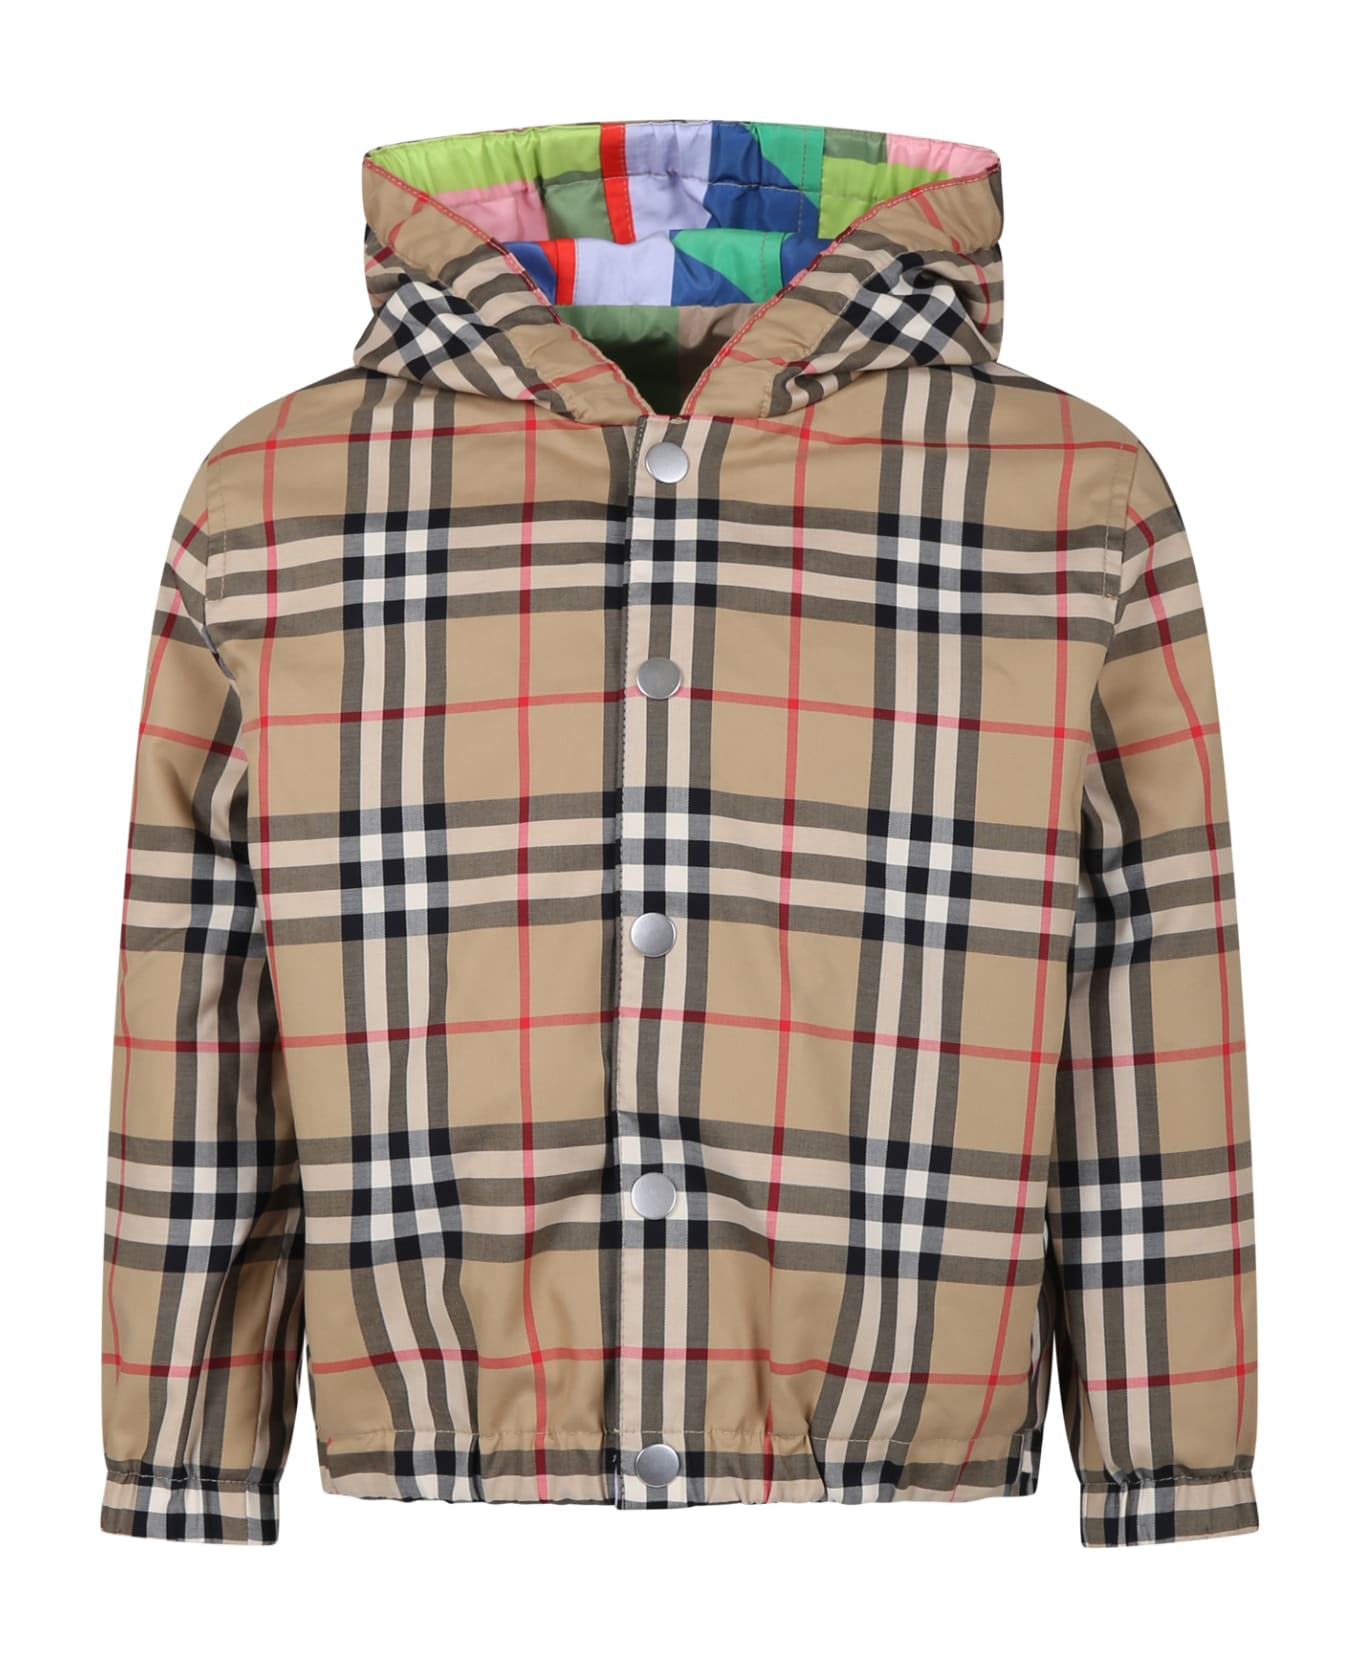 Burberry Beige Jacket For Boy With Iconic Vintage Check - Beige